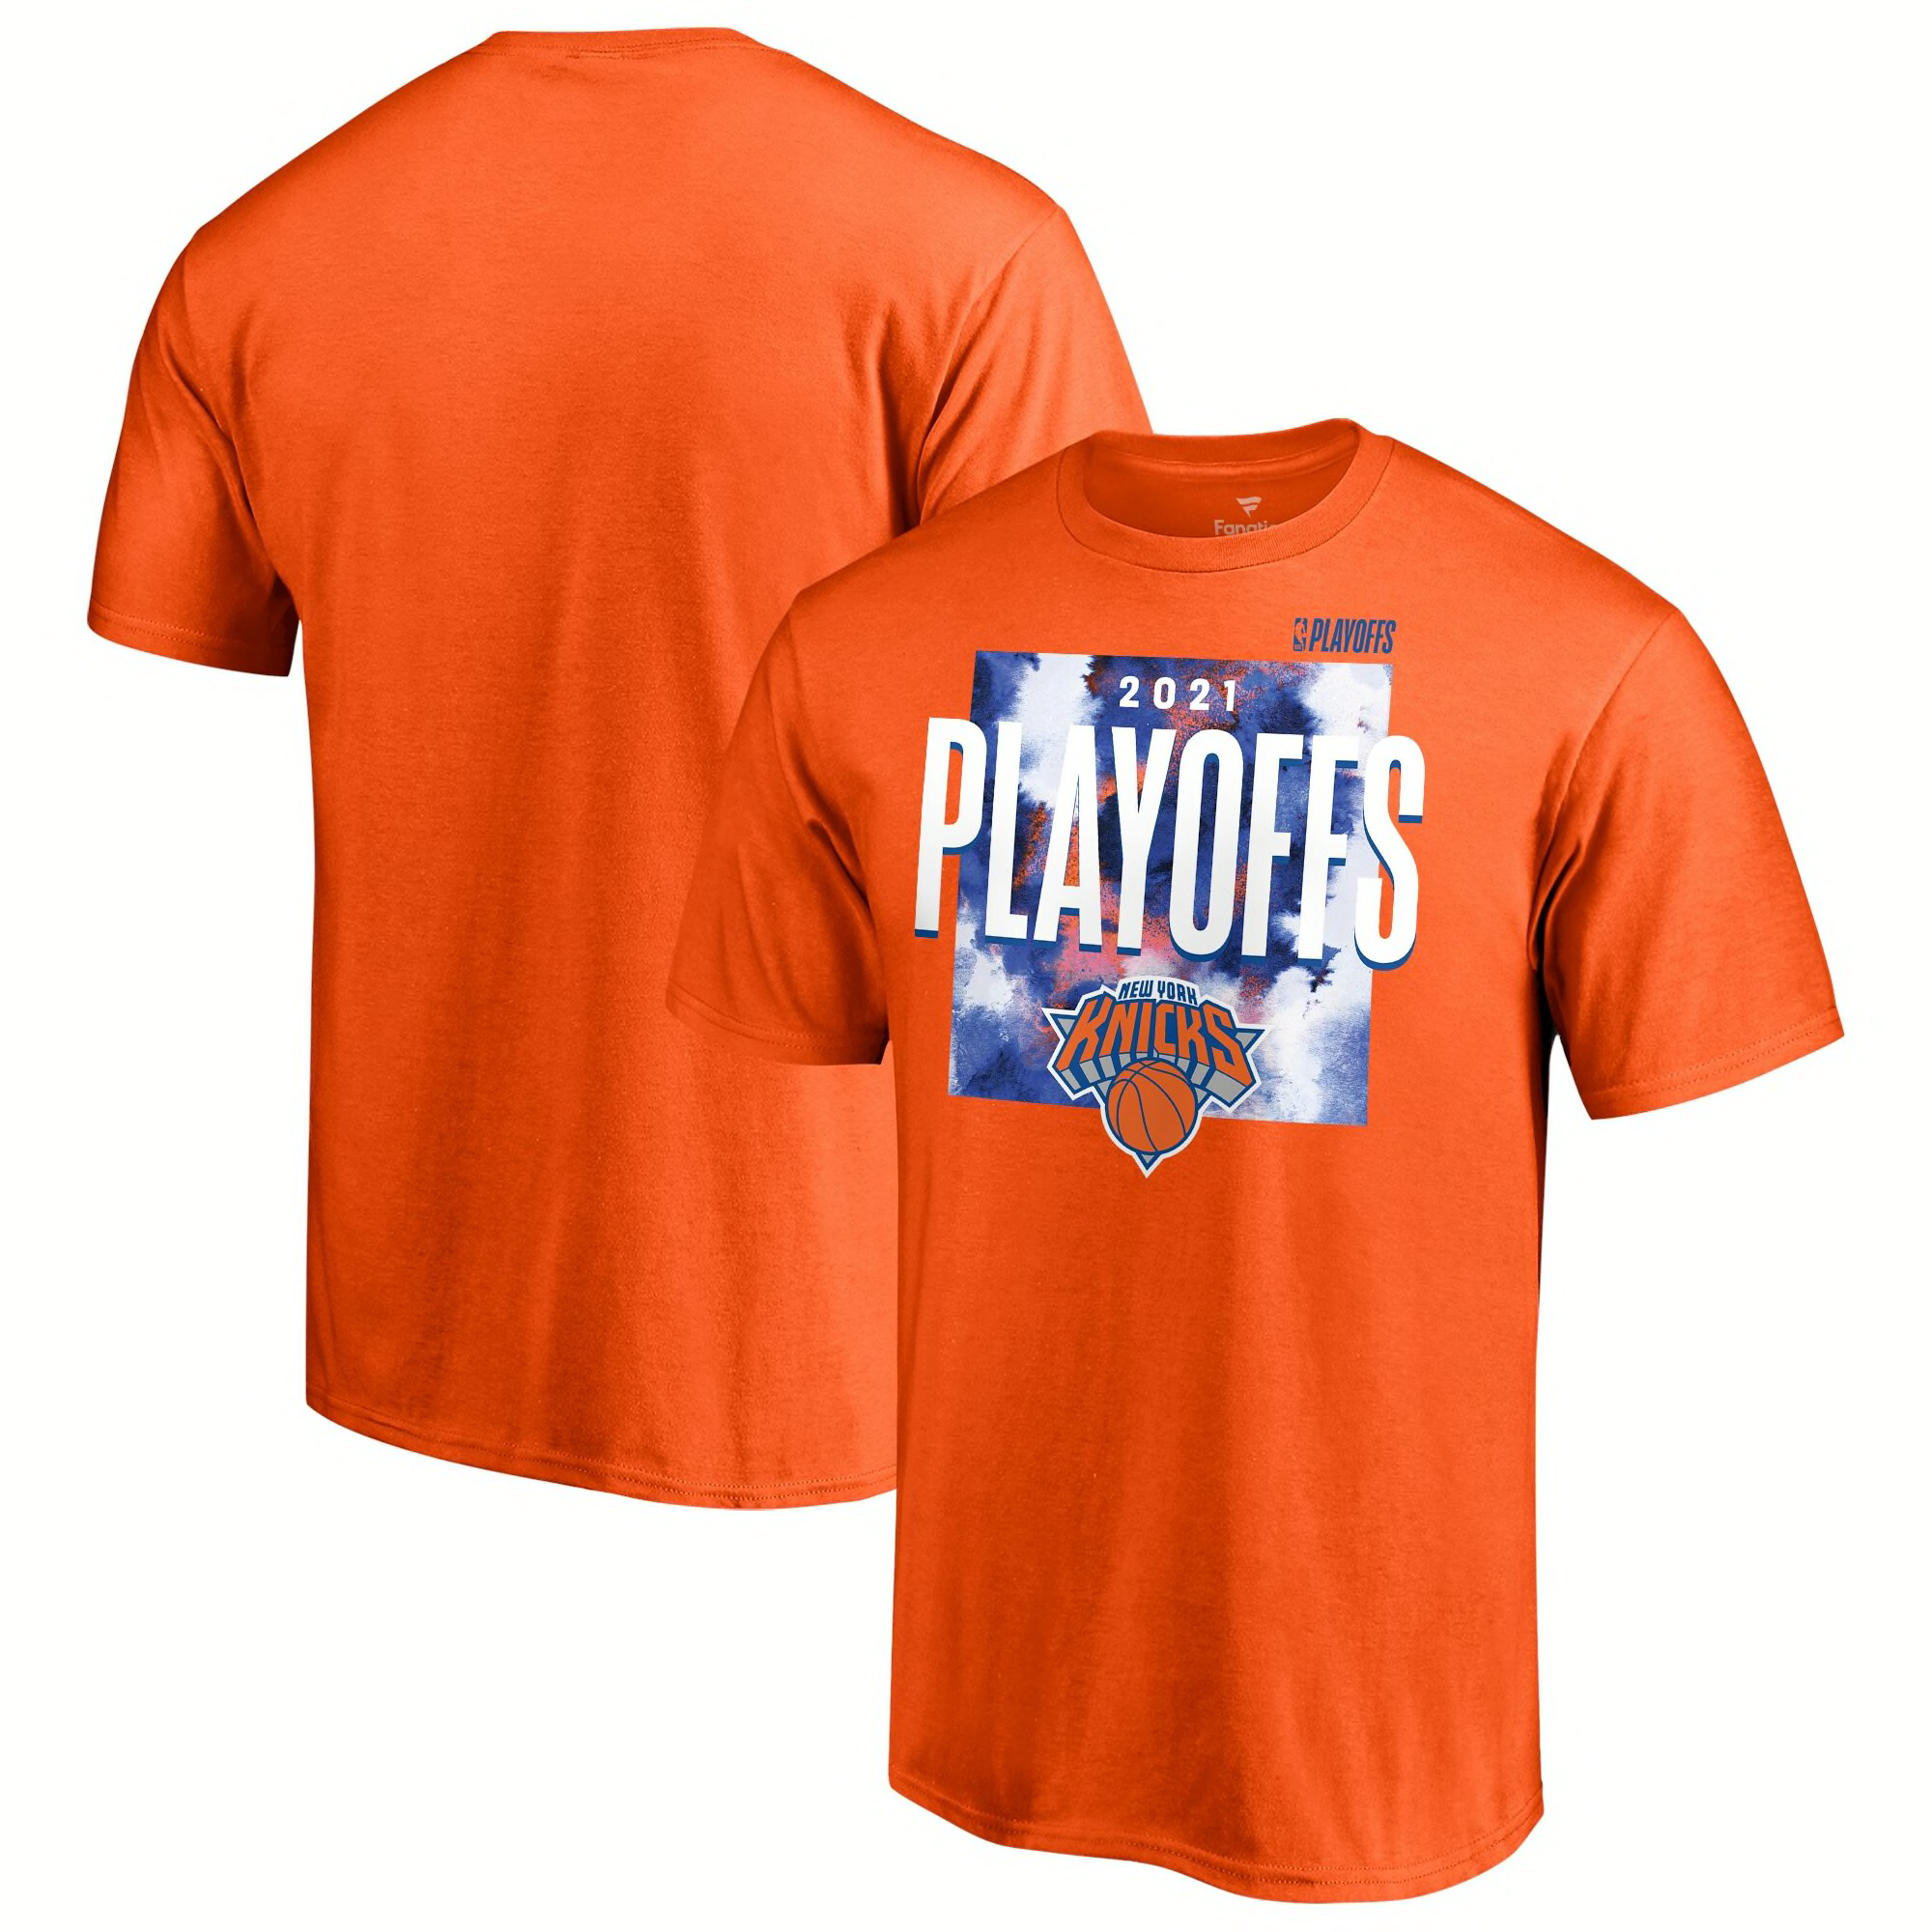 Get the best NY Knicks gear on Fanatics for the 2023 NBA Playoffs